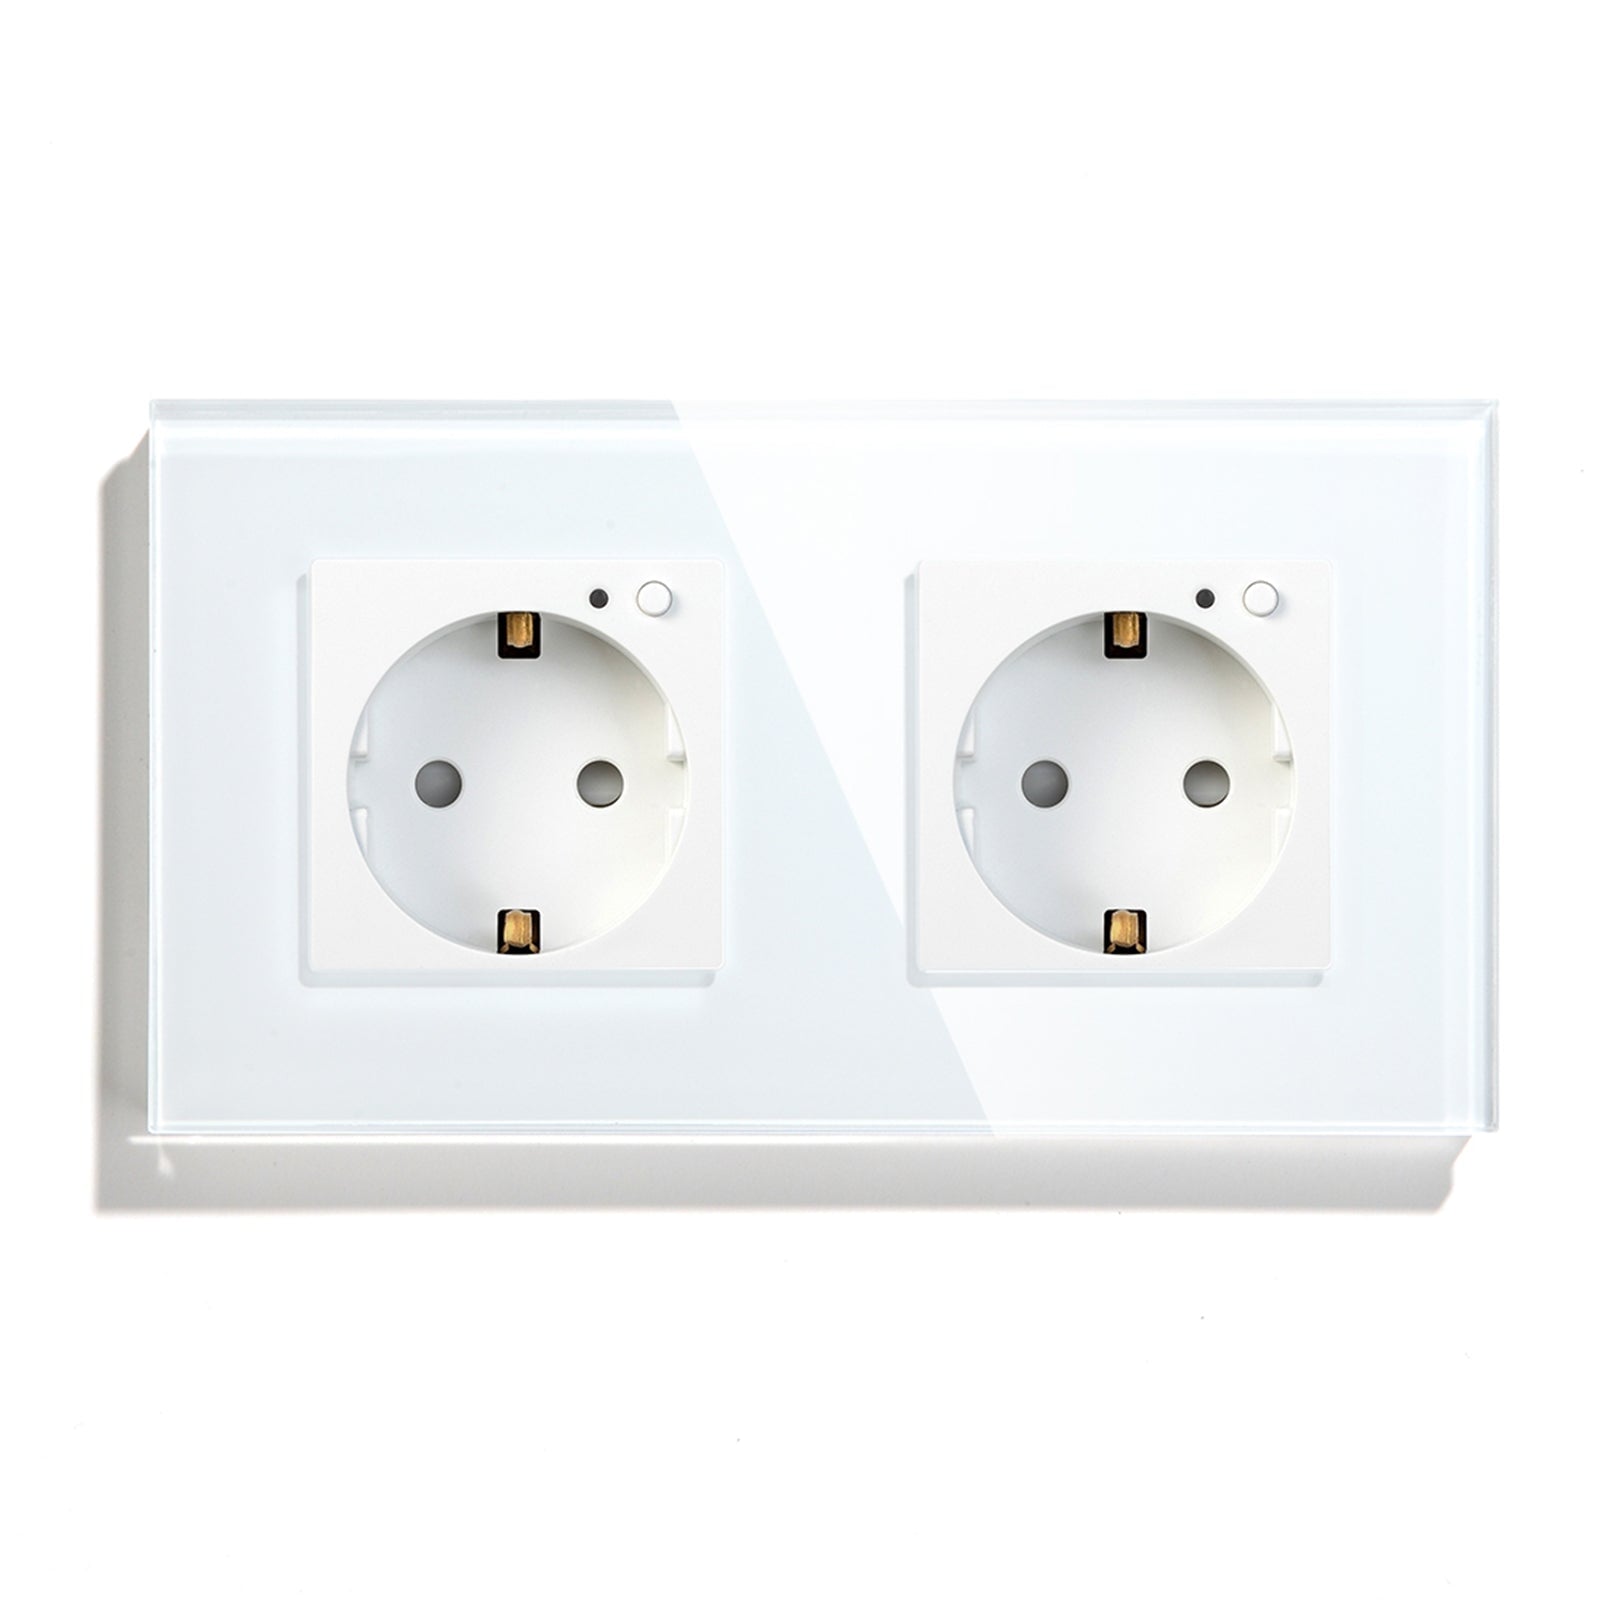 BSEED ZigBee EU Wall Sockets Power Outlets Kids Protection Wall Plates & Covers Bseedswitch white Double 